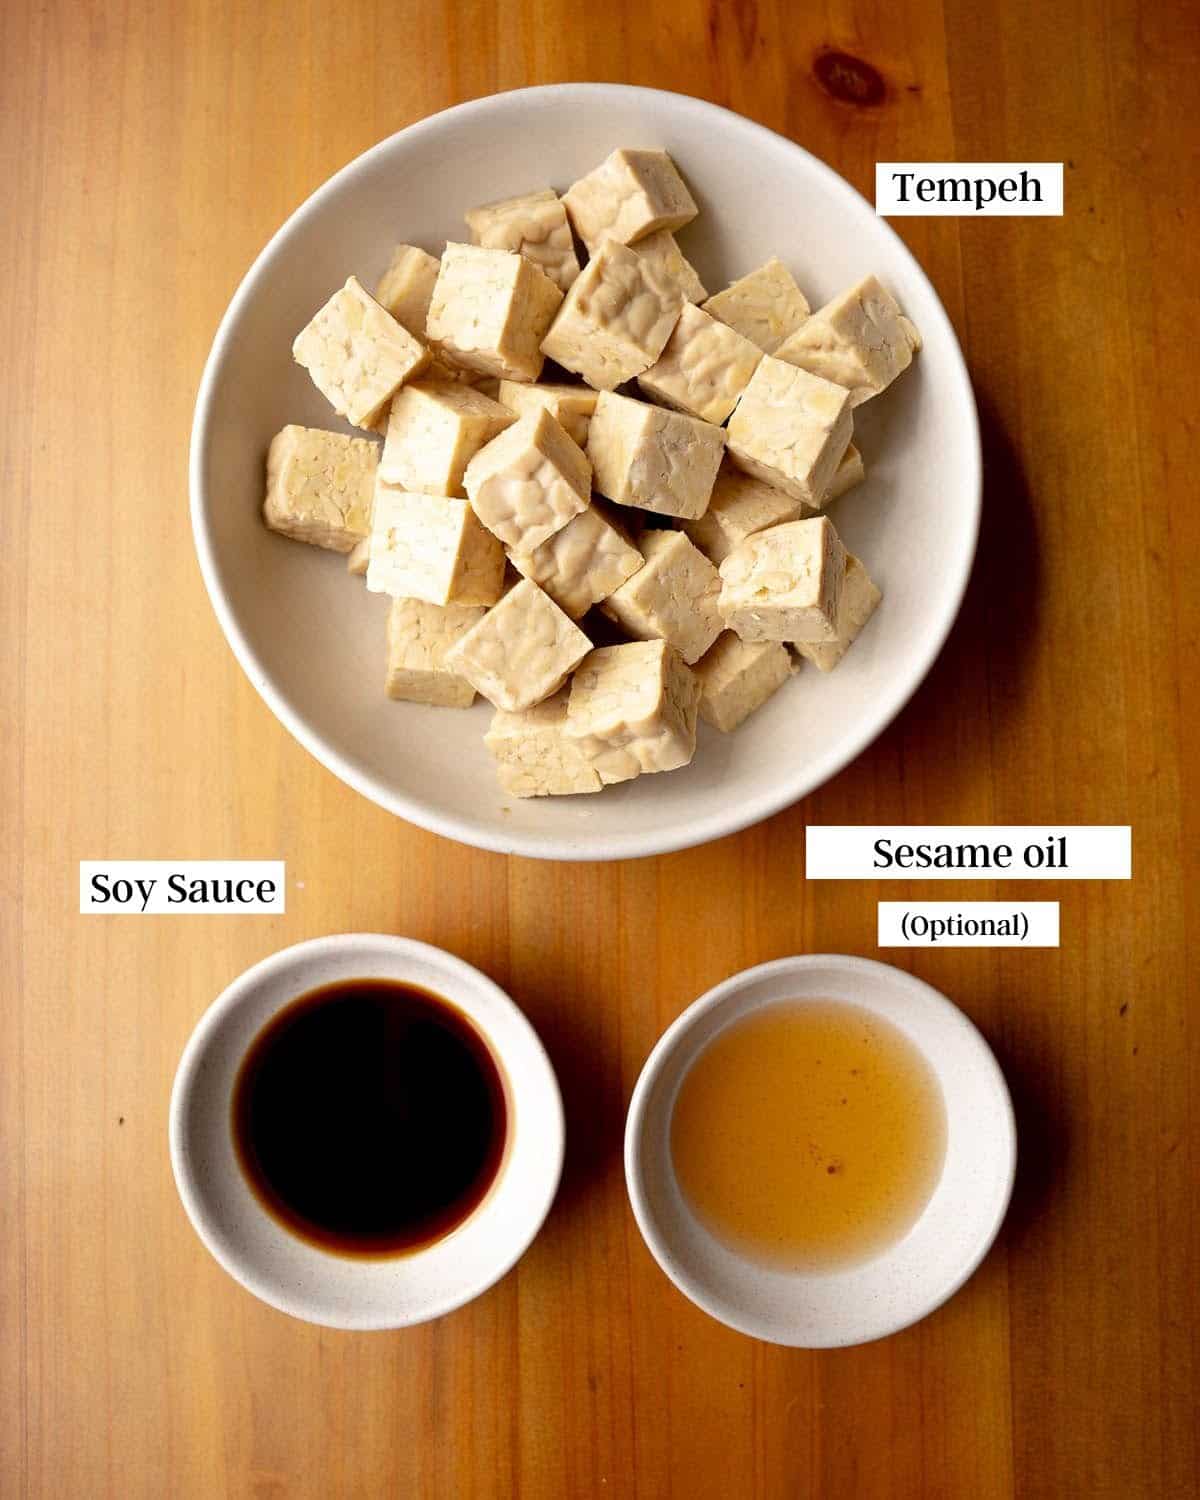 Tempeh chunks, soy sauce and oil in bowls on a wooden table.